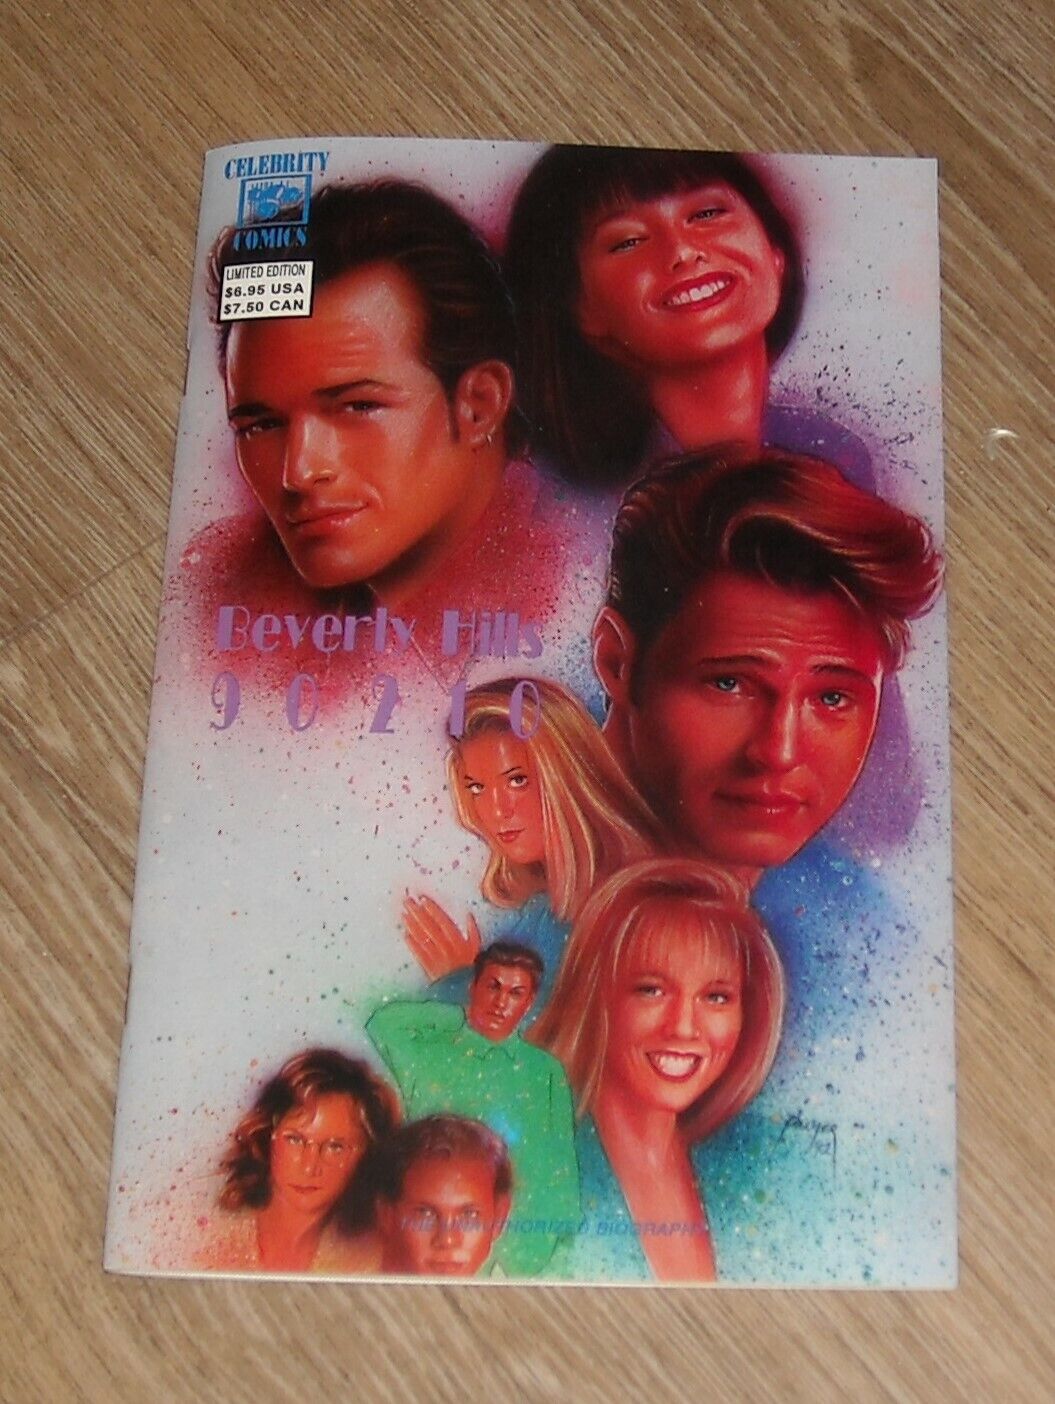 BEVERLY HILLS 90210 CELEBRITY COMICS 1992 LUKE PERRY with LIMITED TRADING CARDS